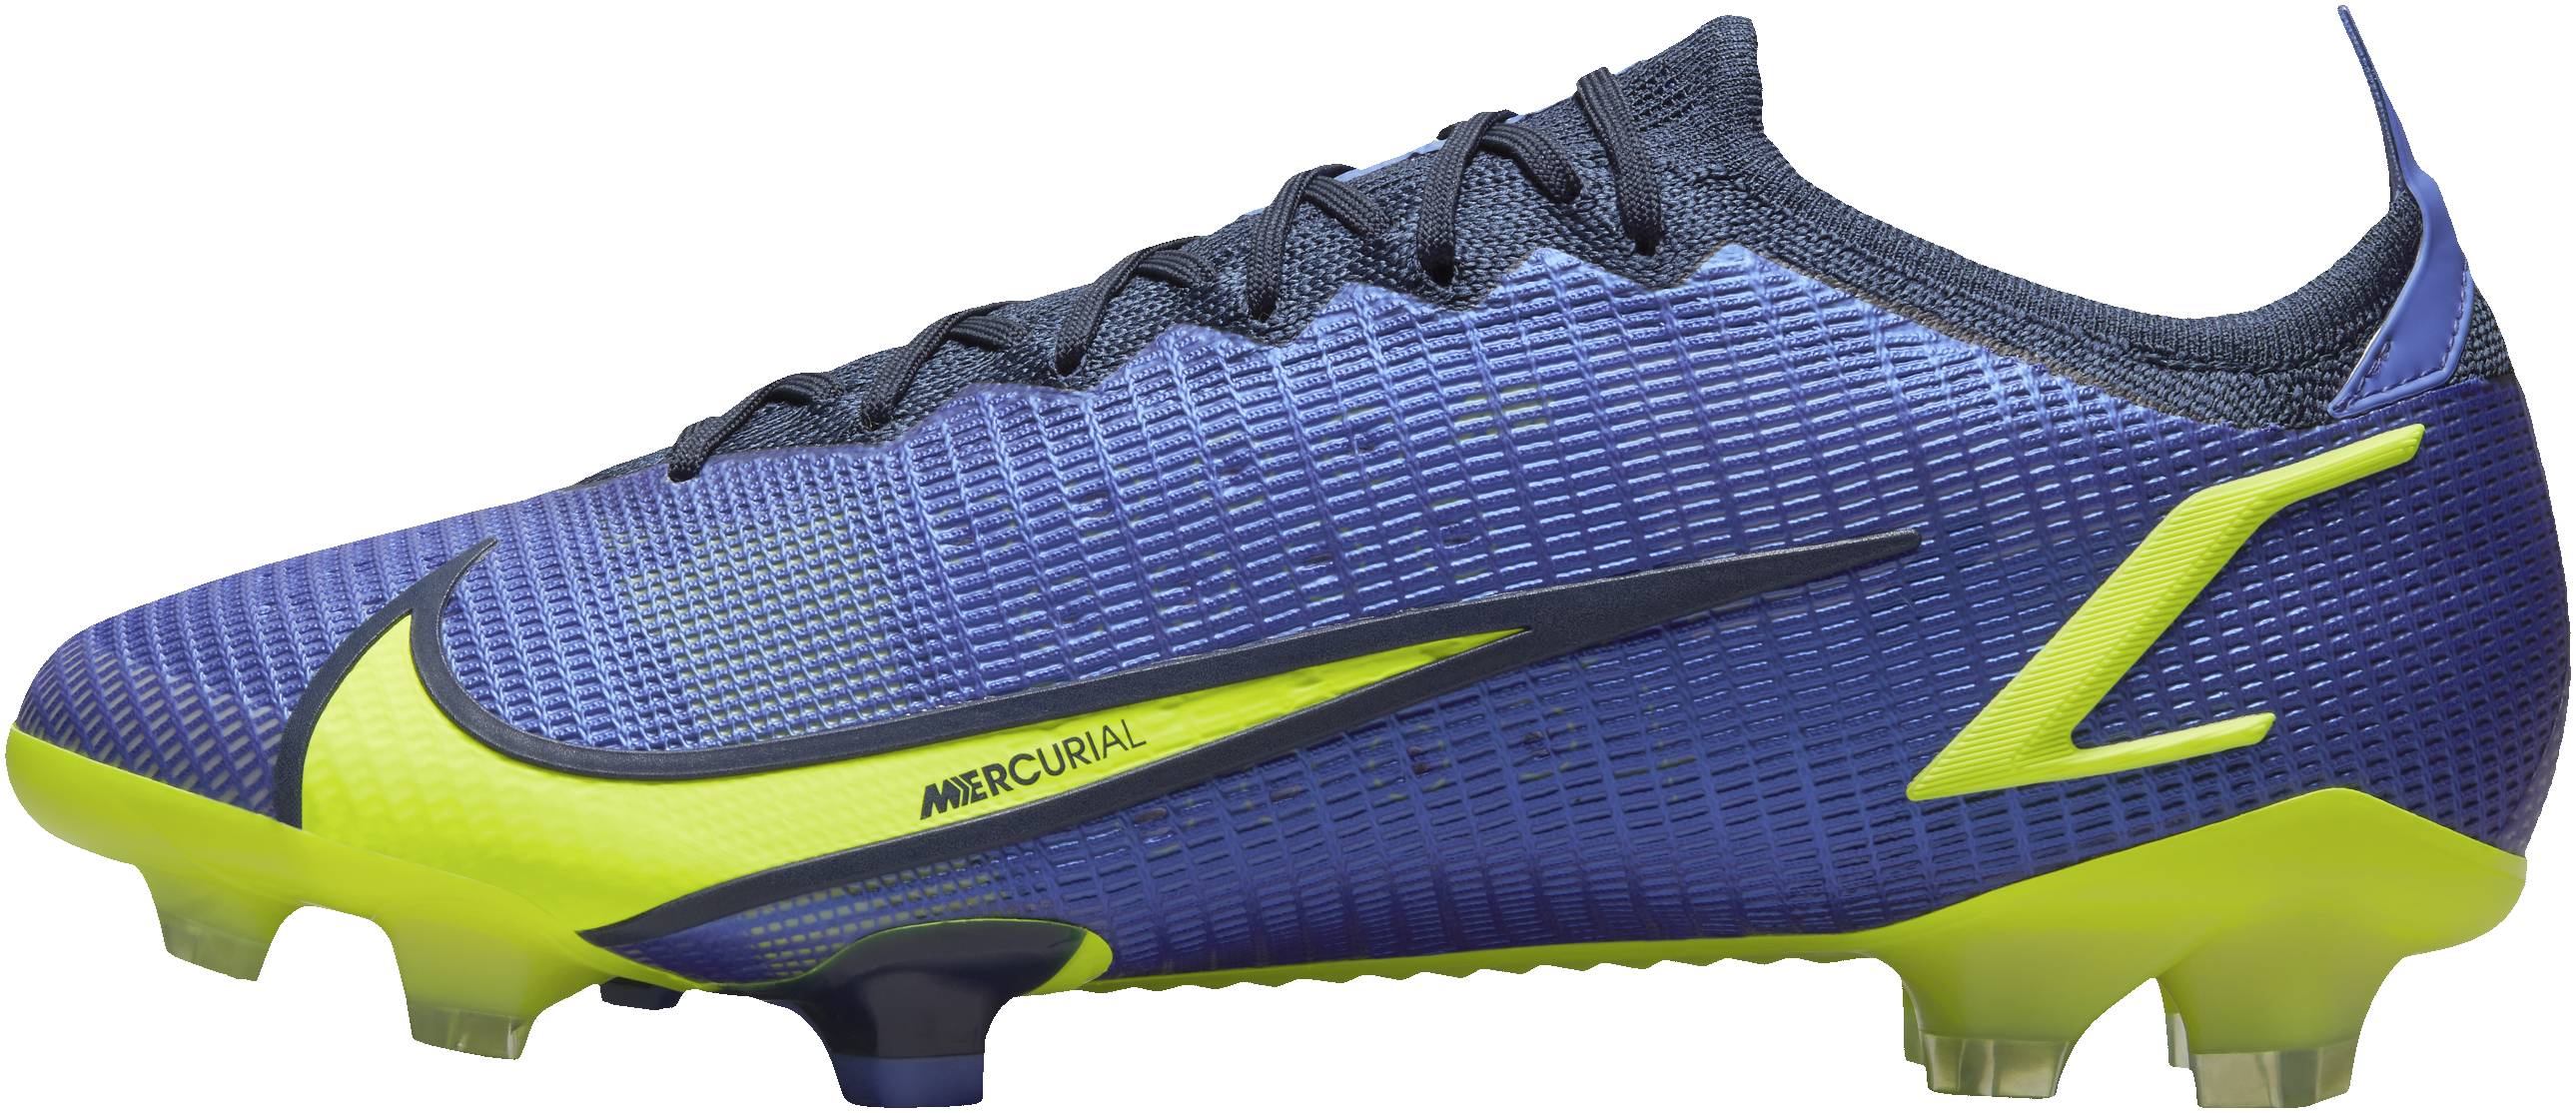 Nike Mercurial Soccer Cleats Save Up To 51 Runrepeat